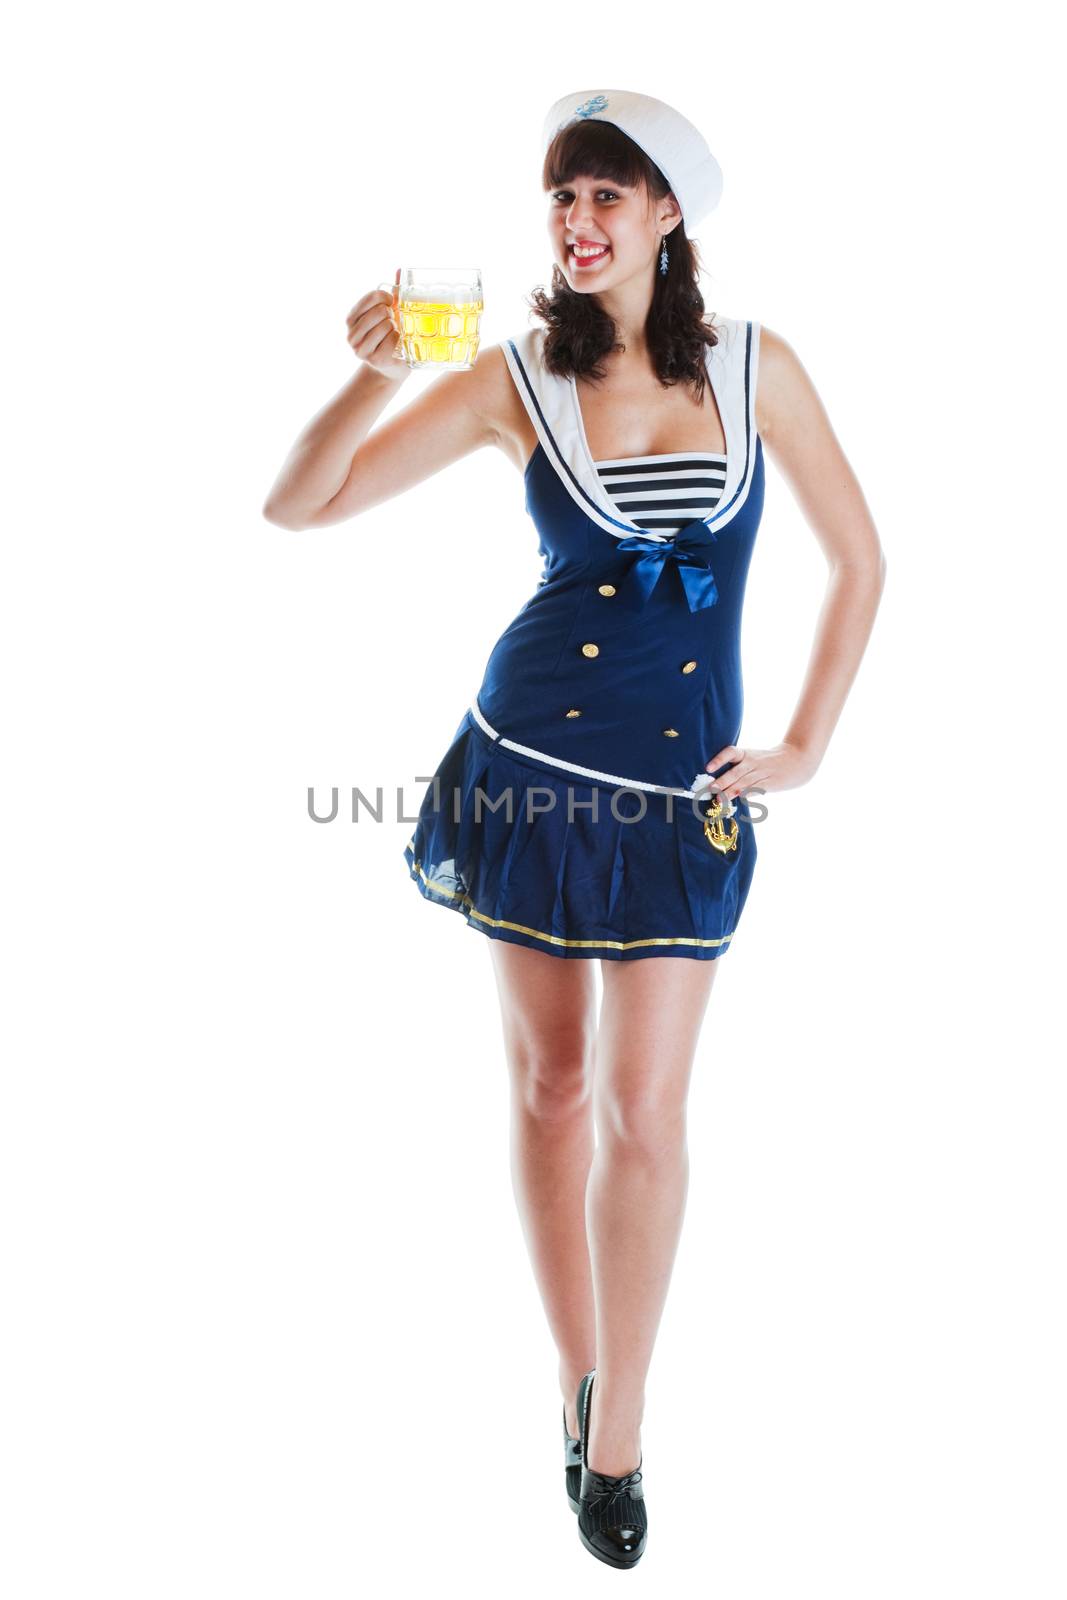 Pretty, young pinup girl in sailor suit holding a mug of beer.  Shot on white background.